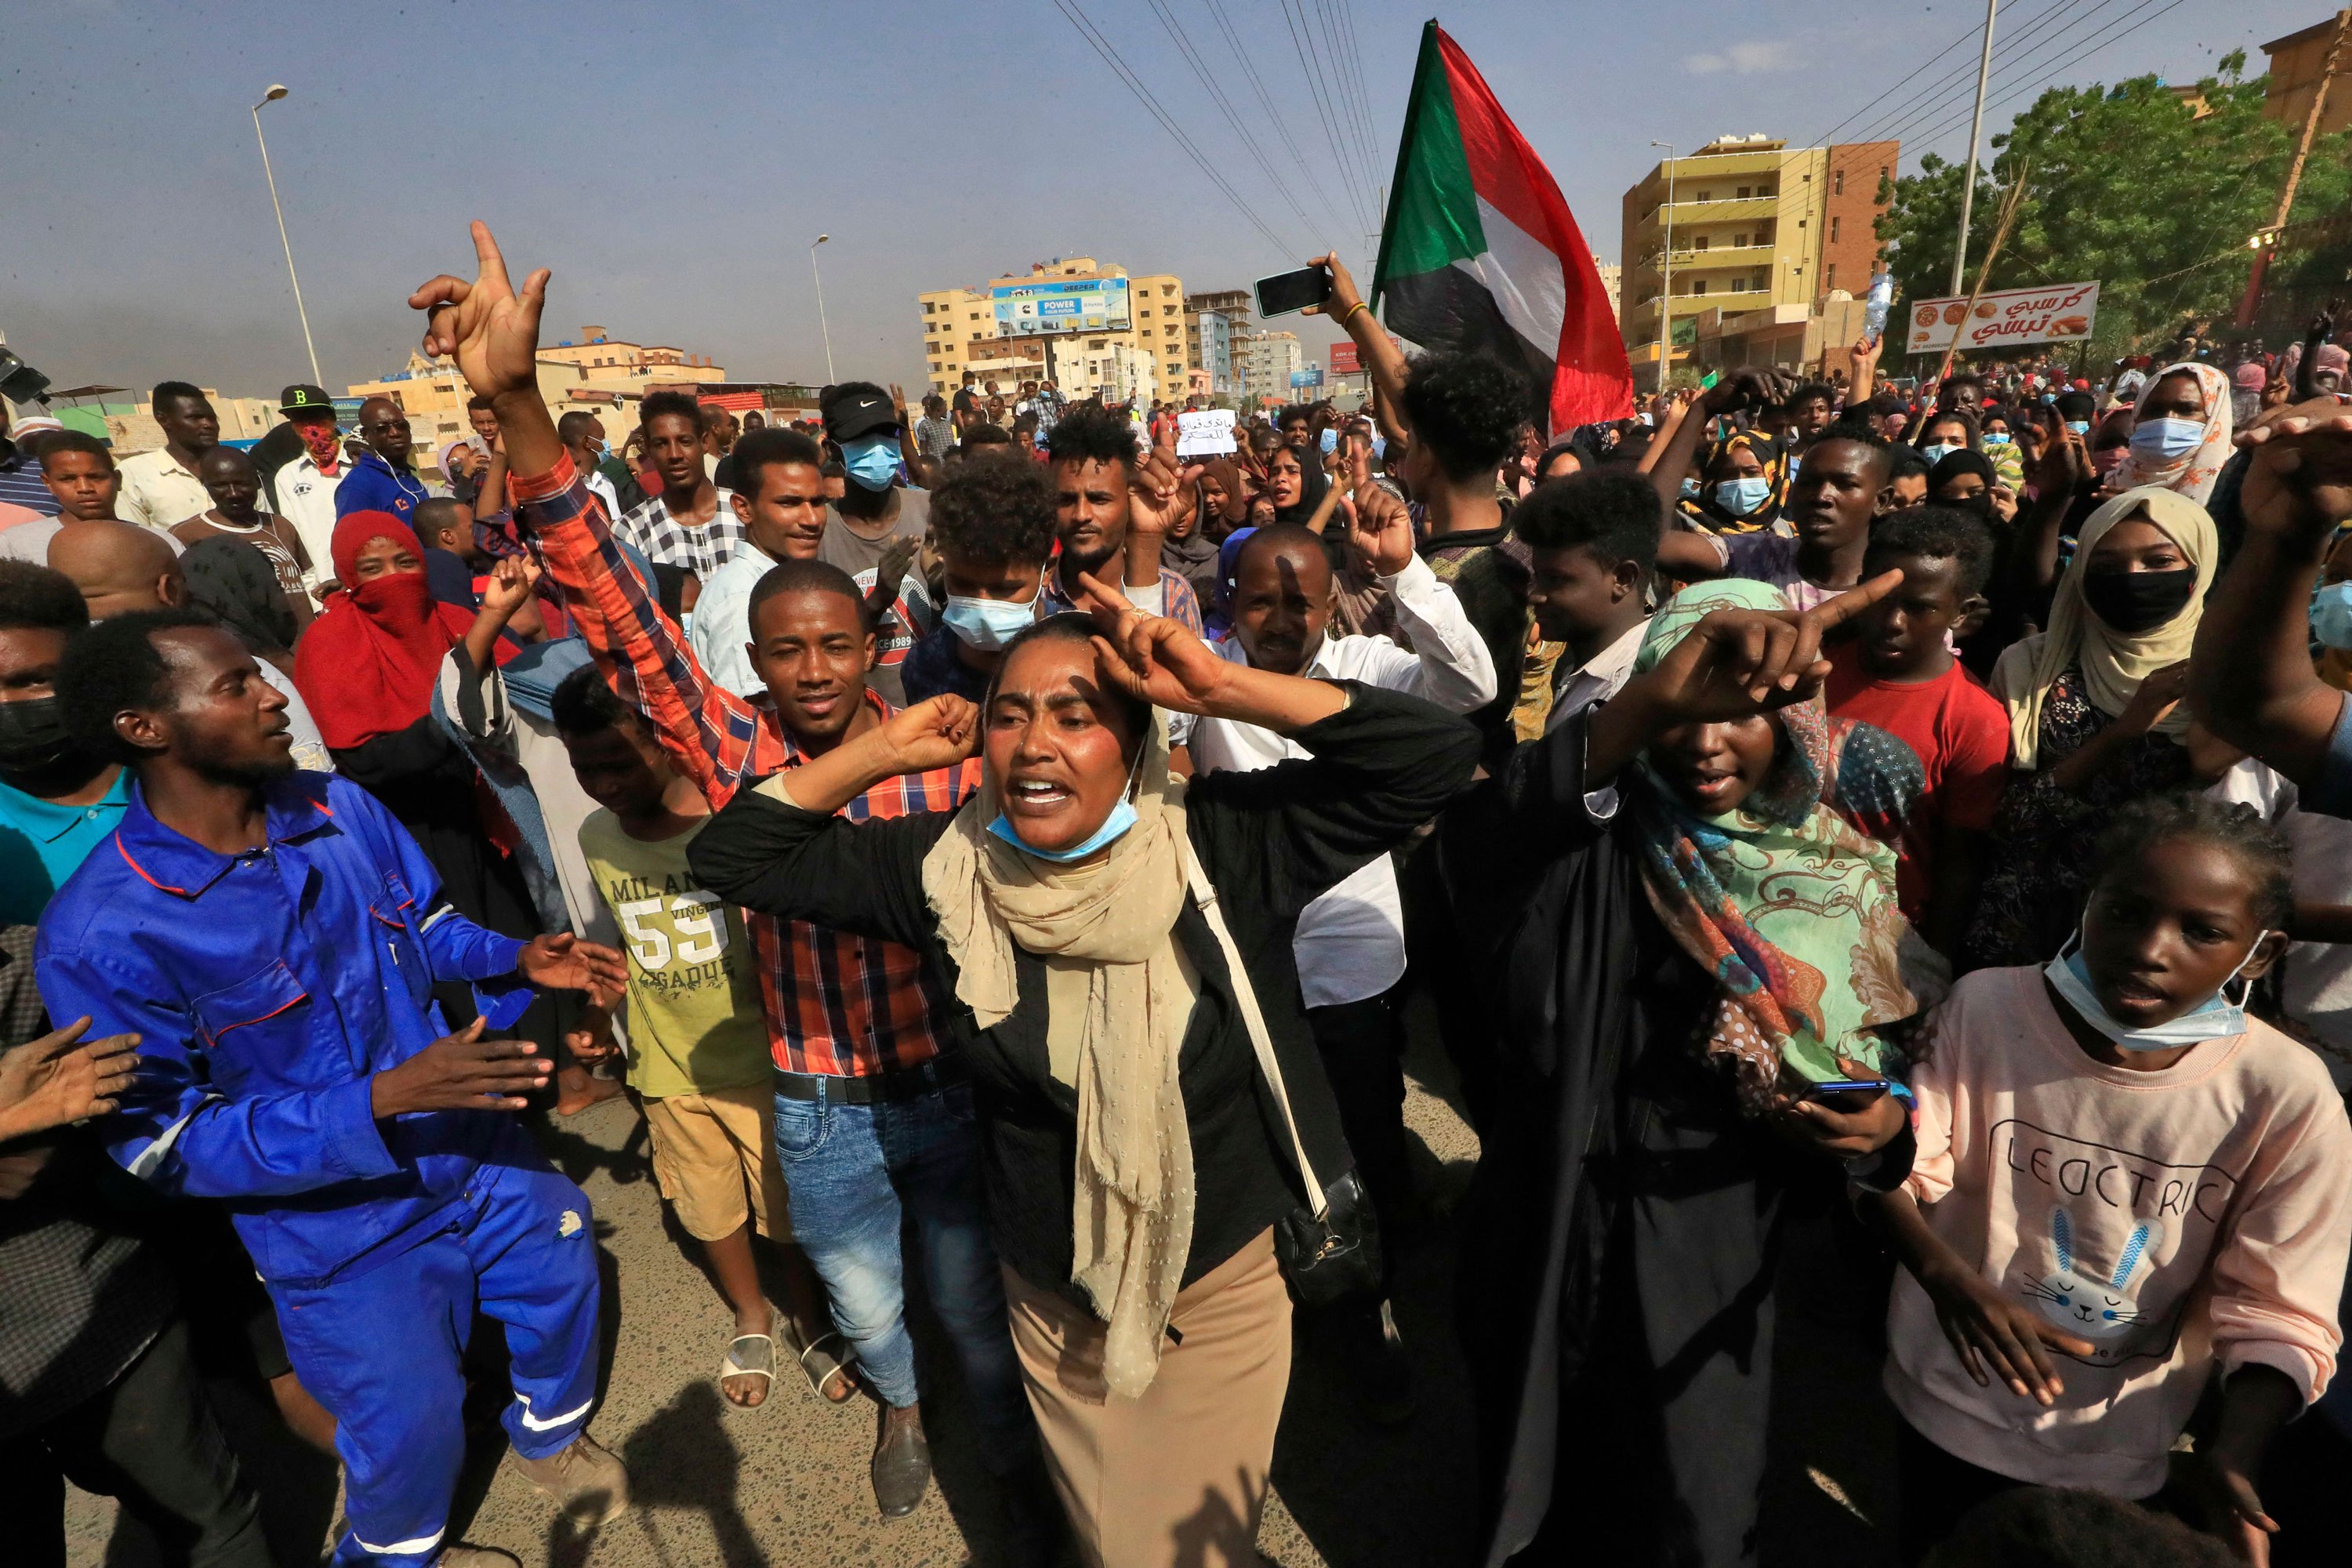 Protesters march on 60th Street in Khartoum, Sudan, on October 25, to denounce detentions by the military of members of Sudan's government.